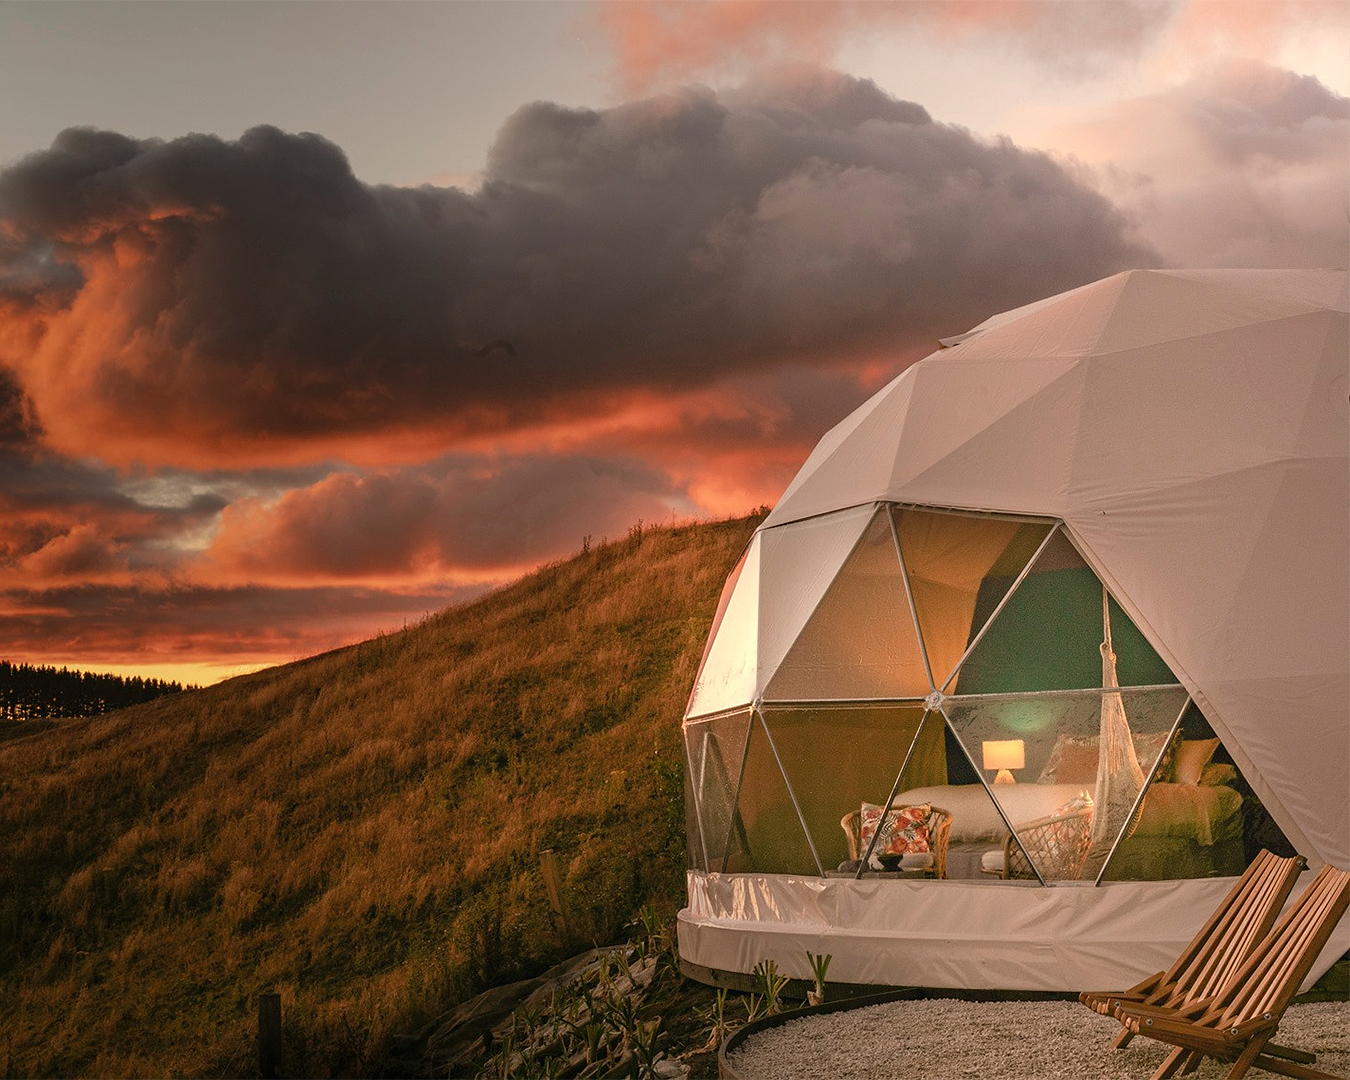 Te Tuhi Dome looks over countryside, looking like the ideal glamping spot.